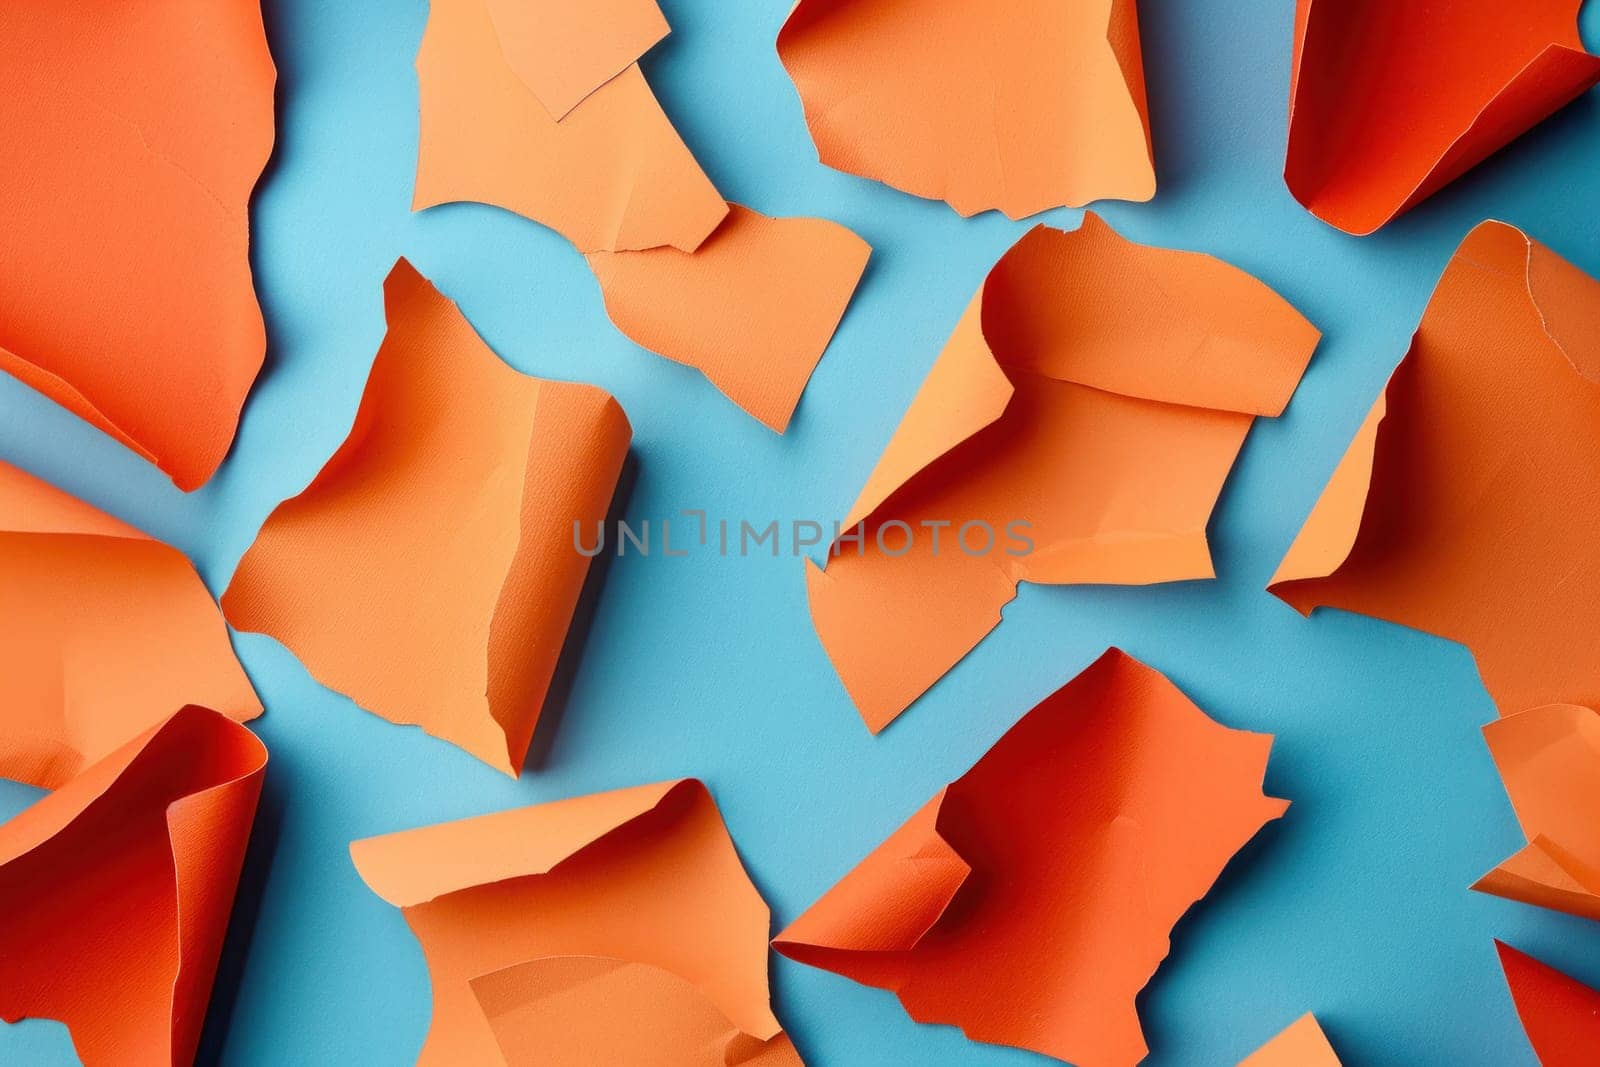 Torn pieces of orange paper on blue background flat lay top view creative design concept texture beauty concept